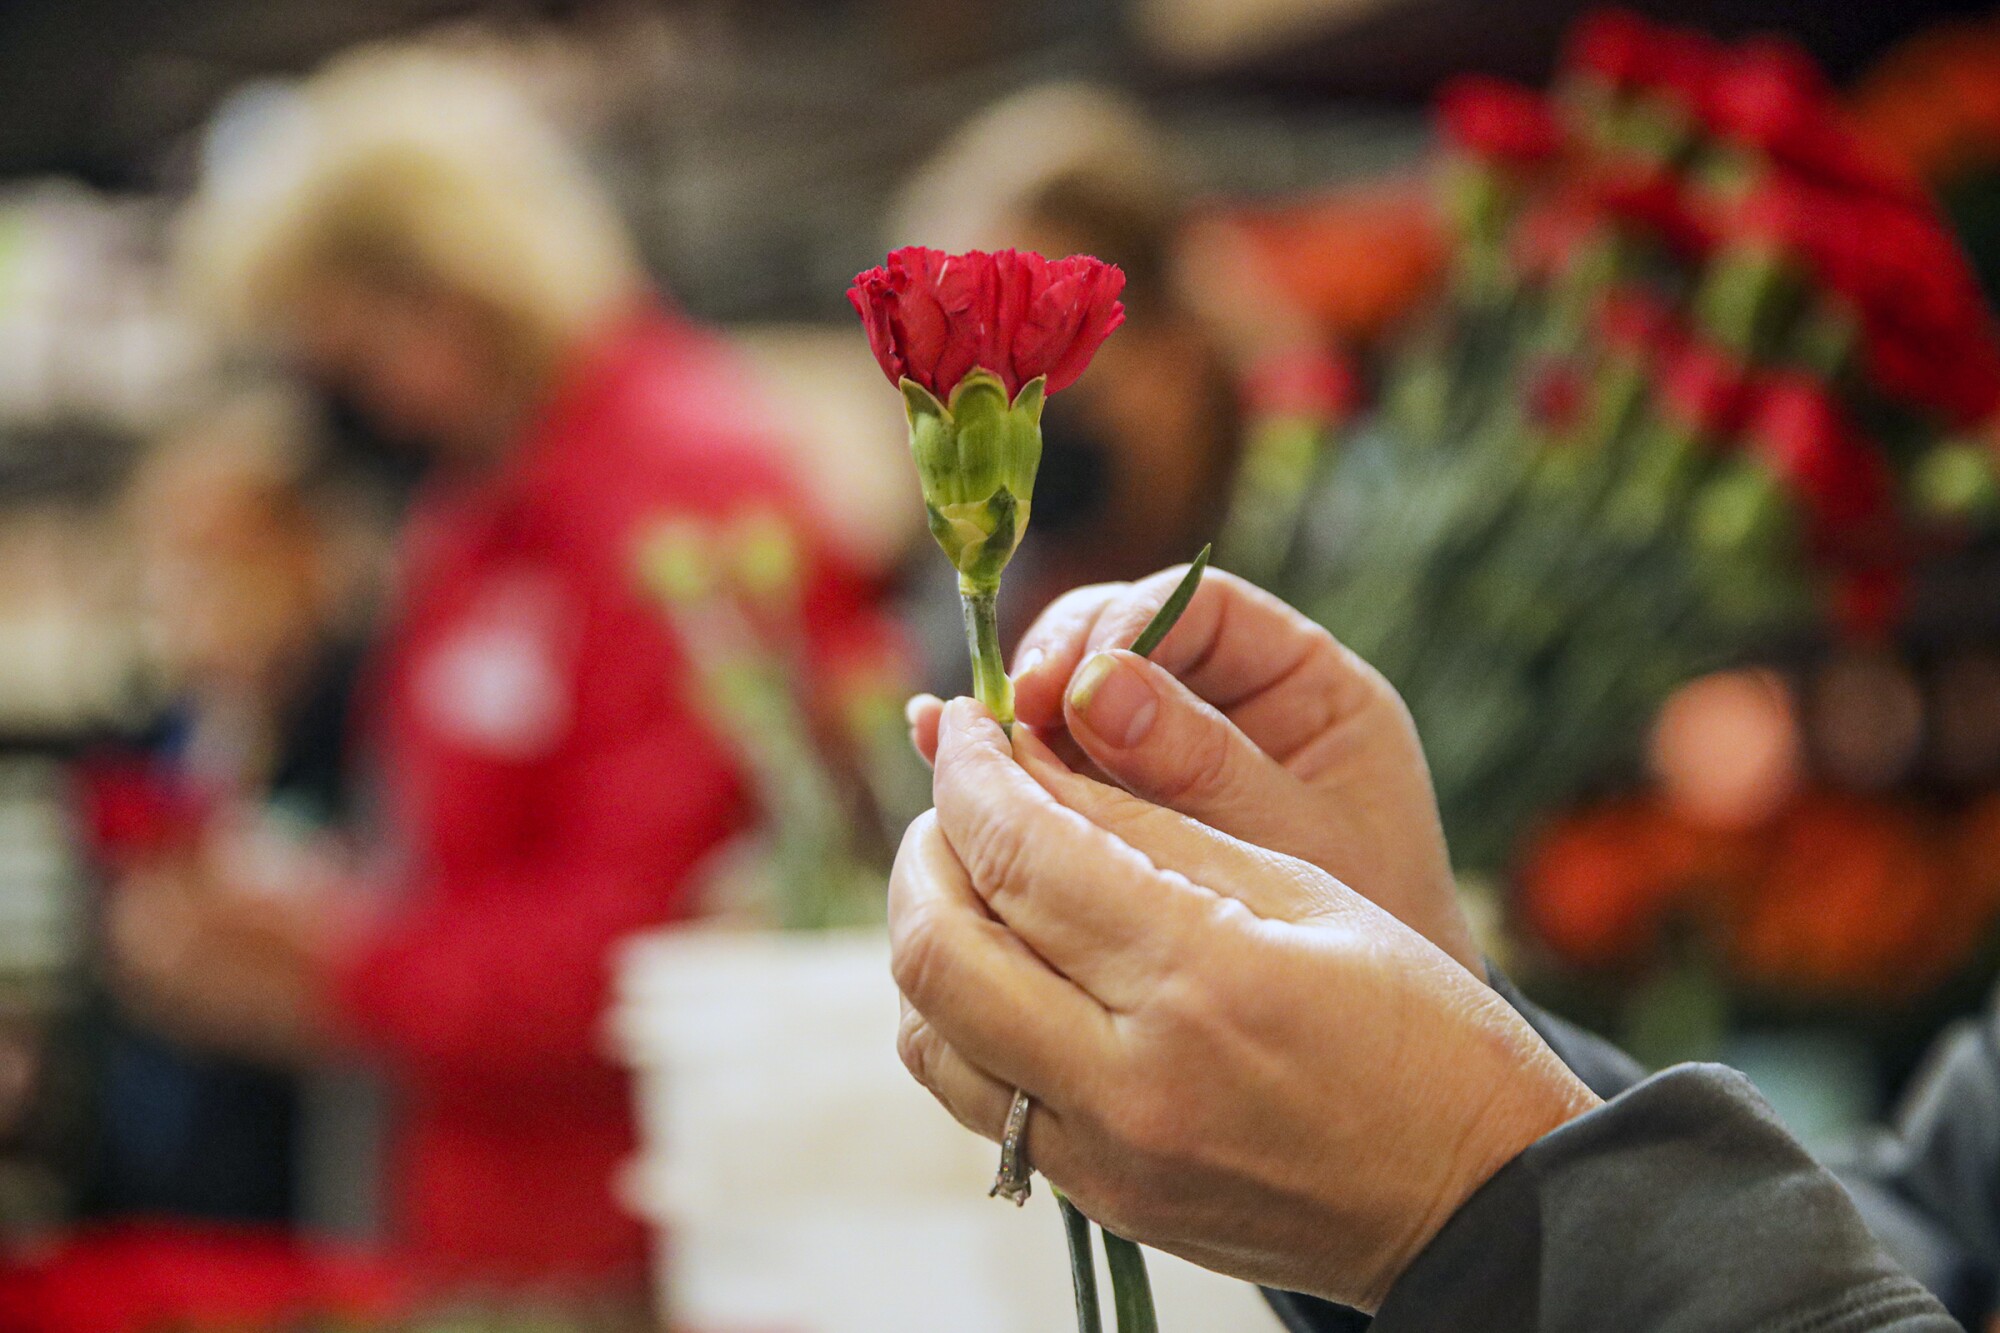 A woman is holding a red carnation.